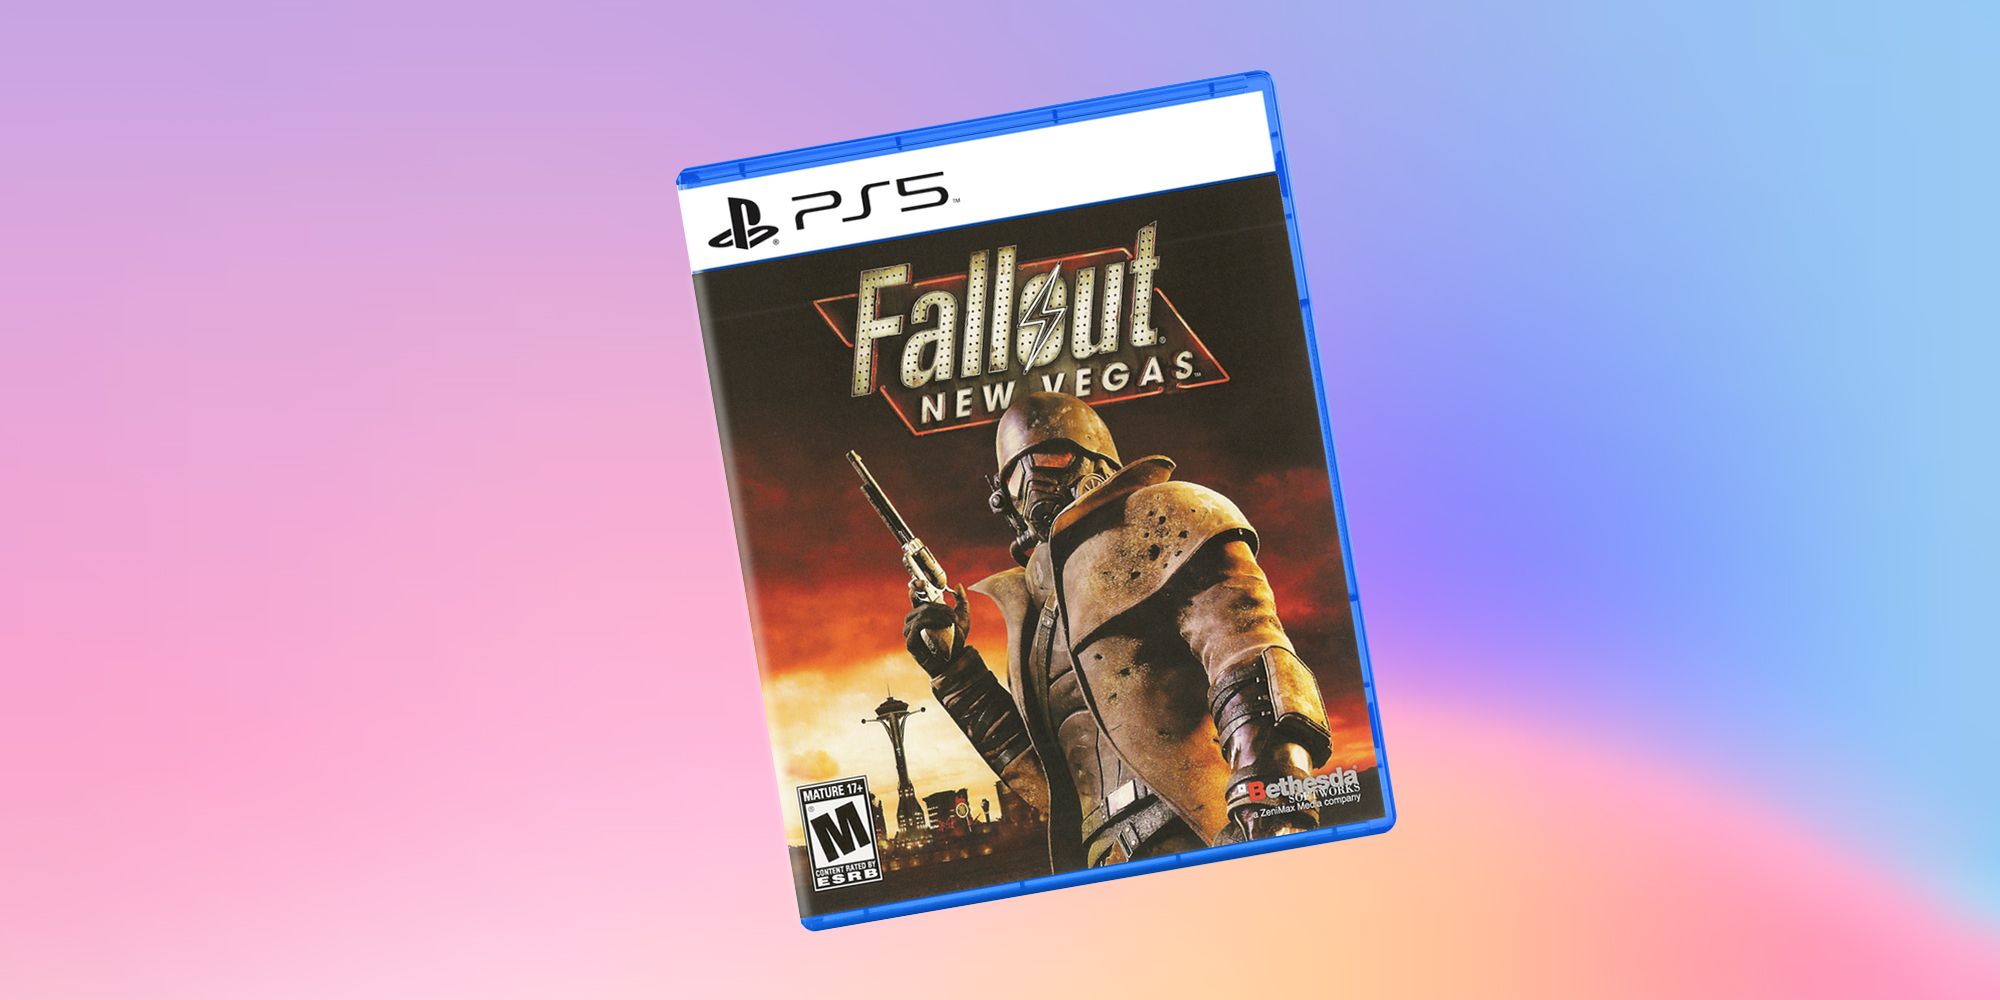 Fake boxart for Fallout New Vegas on PS5